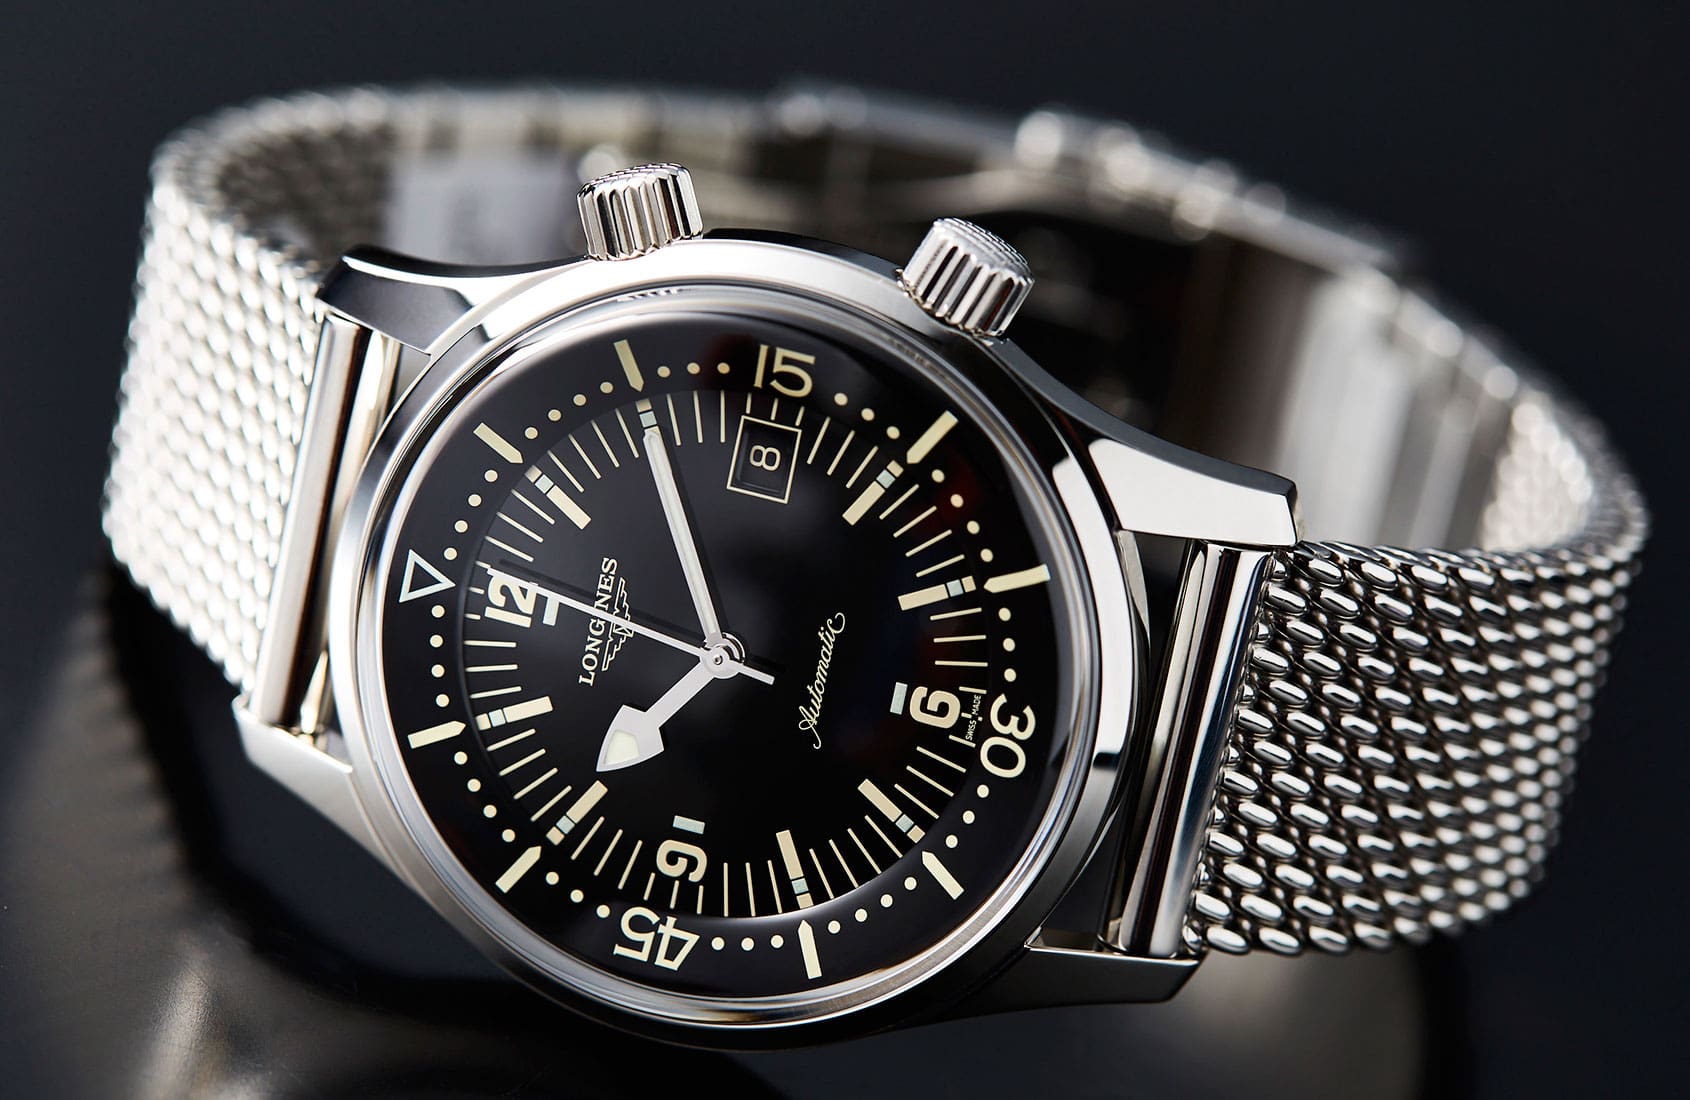 HANDS-ON: The Longines Legend Diver, now on mesh 